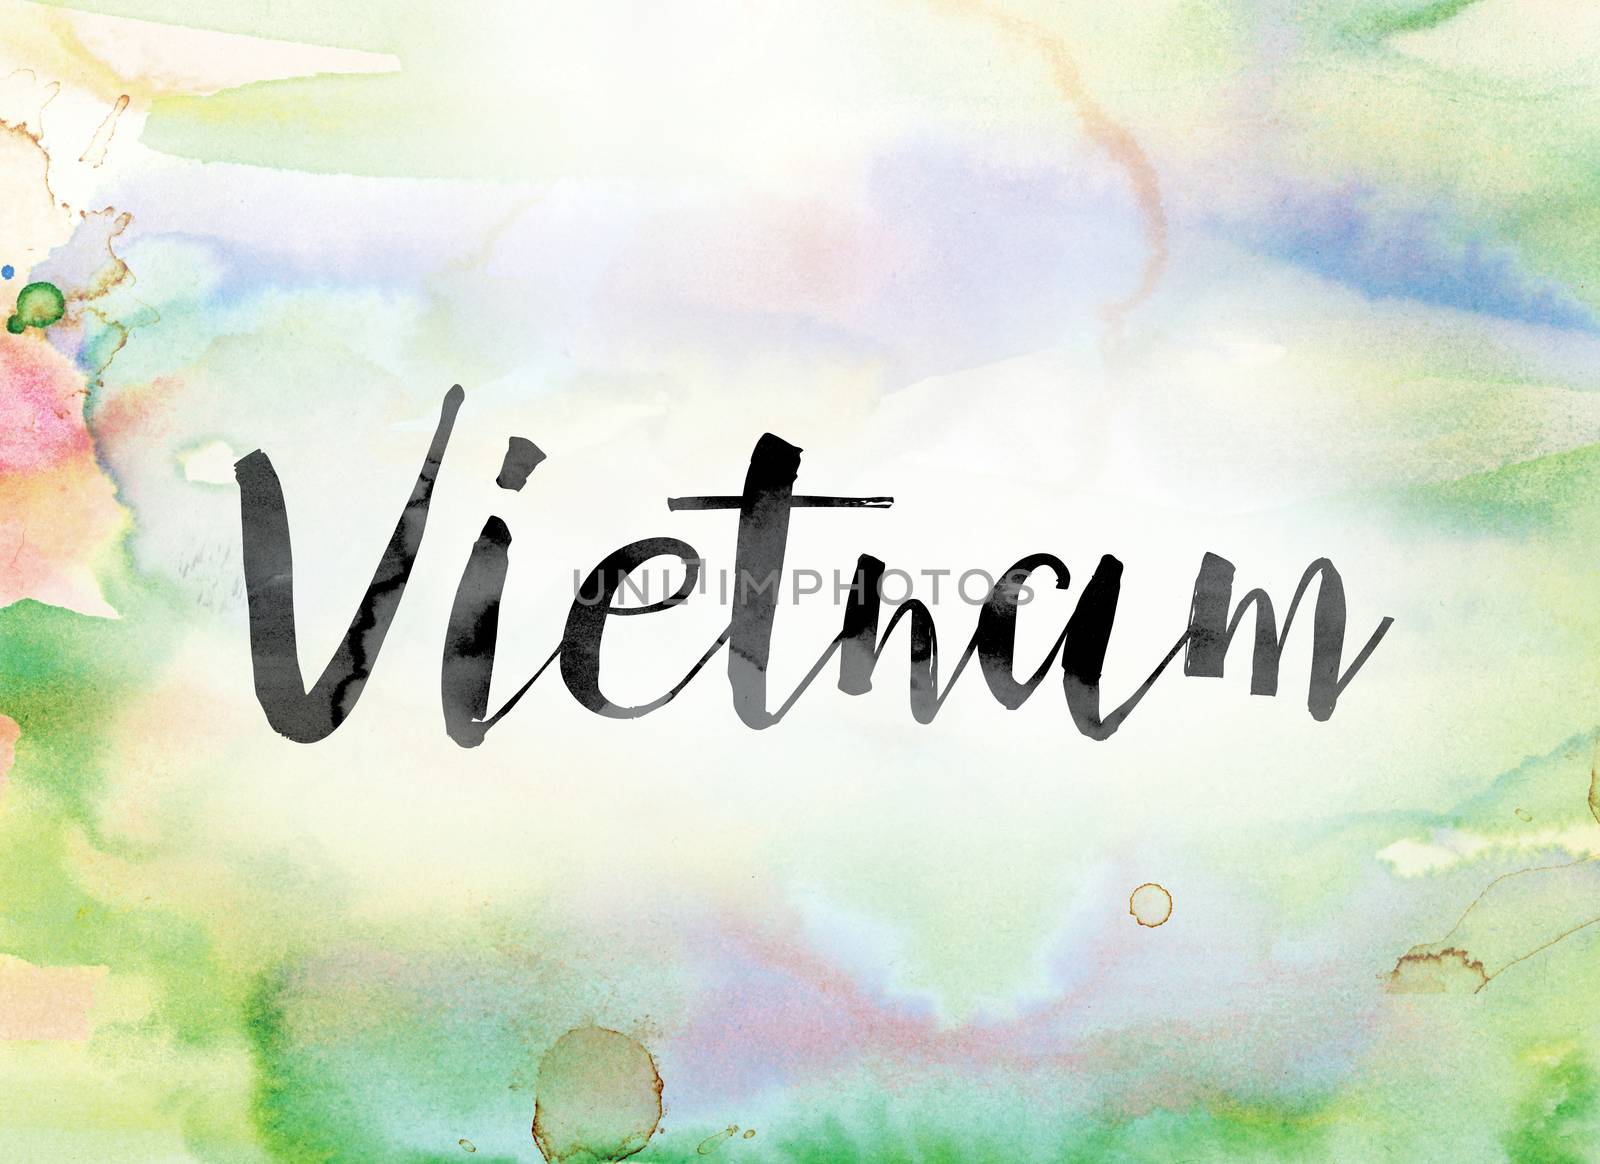 The word "Vietnam" painted in black ink over a colorful watercolor washed background concept and theme.